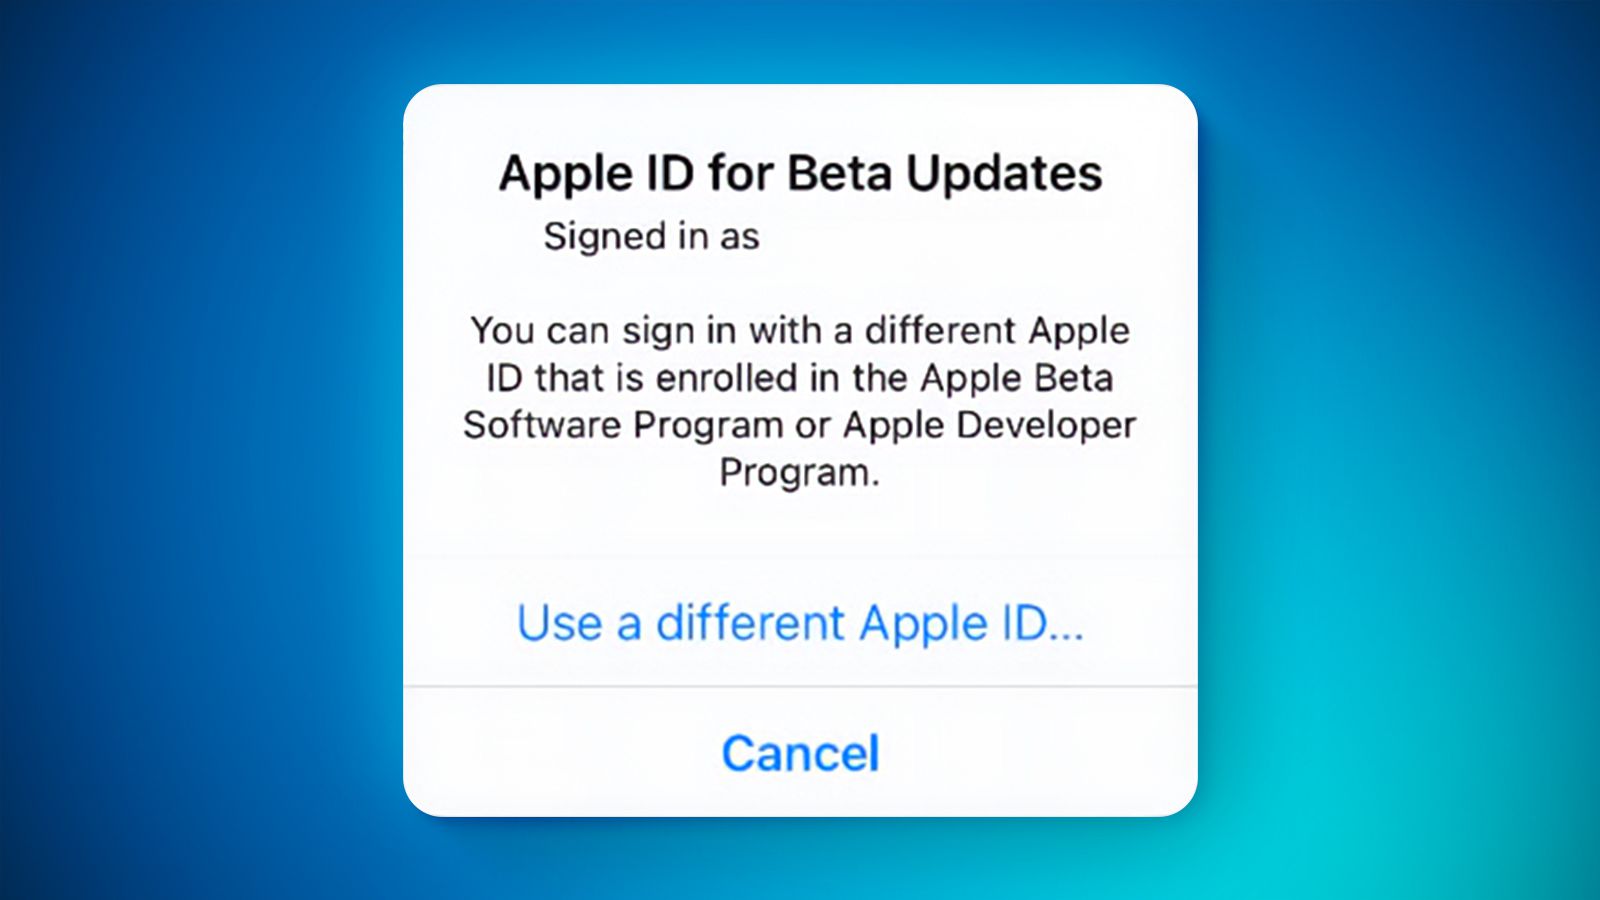 iOS 16.4 Will Let You Specify an Apple ID to Use for Beta Access - macrumors.com